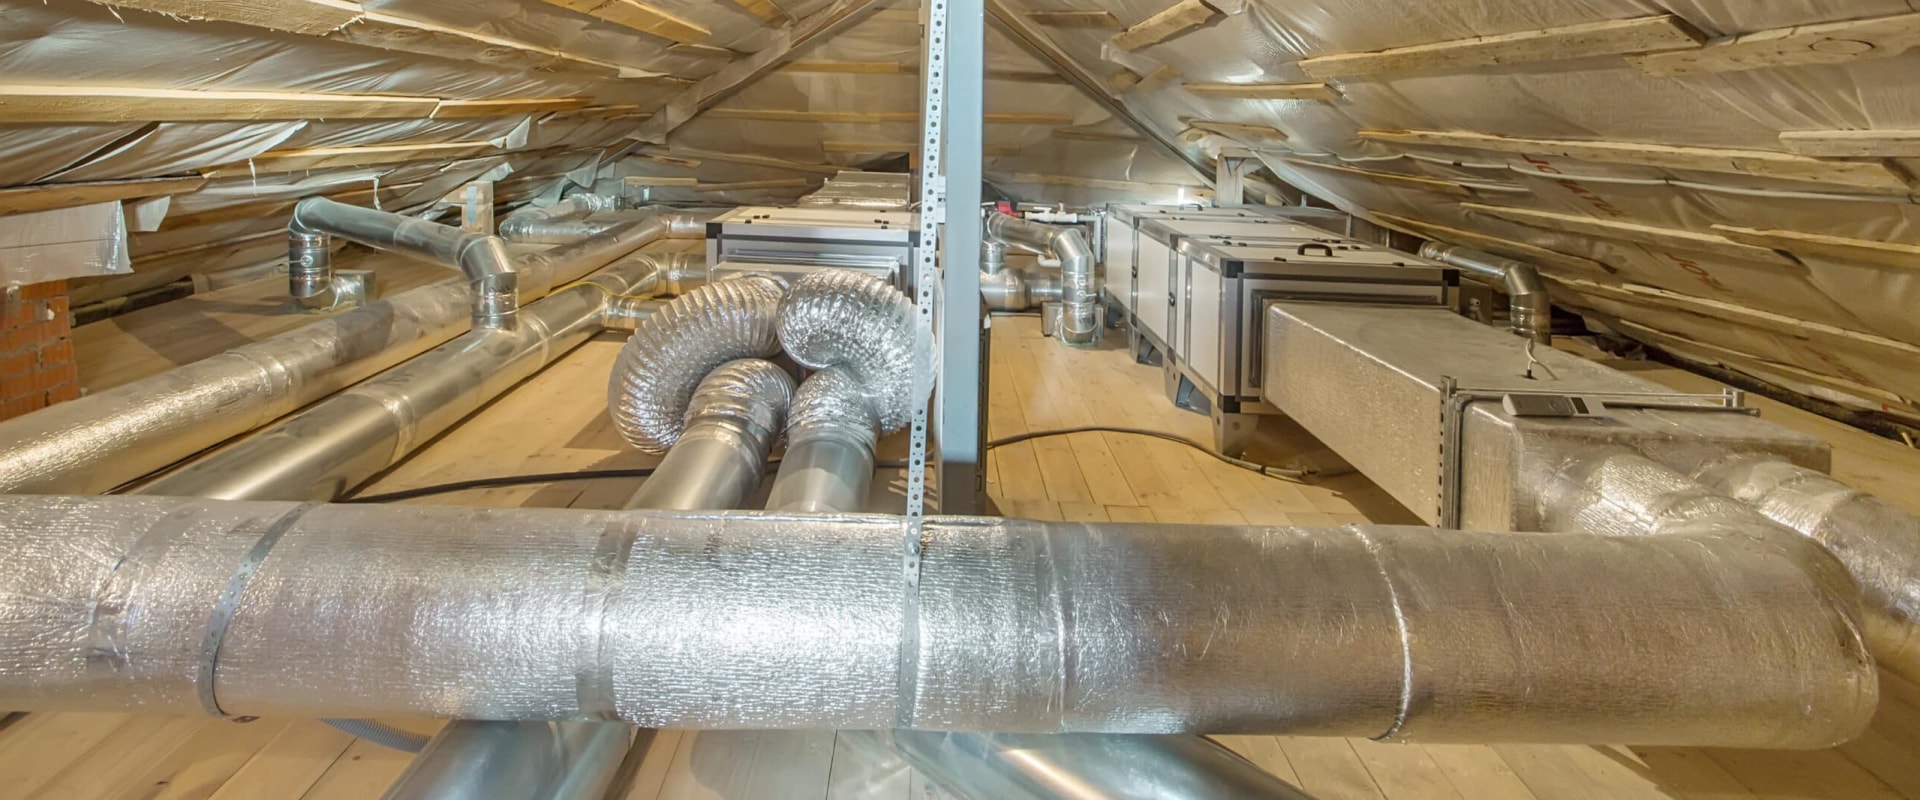 Air Duct Sealing Services for Homes in Cold Climates: What You Need to Know